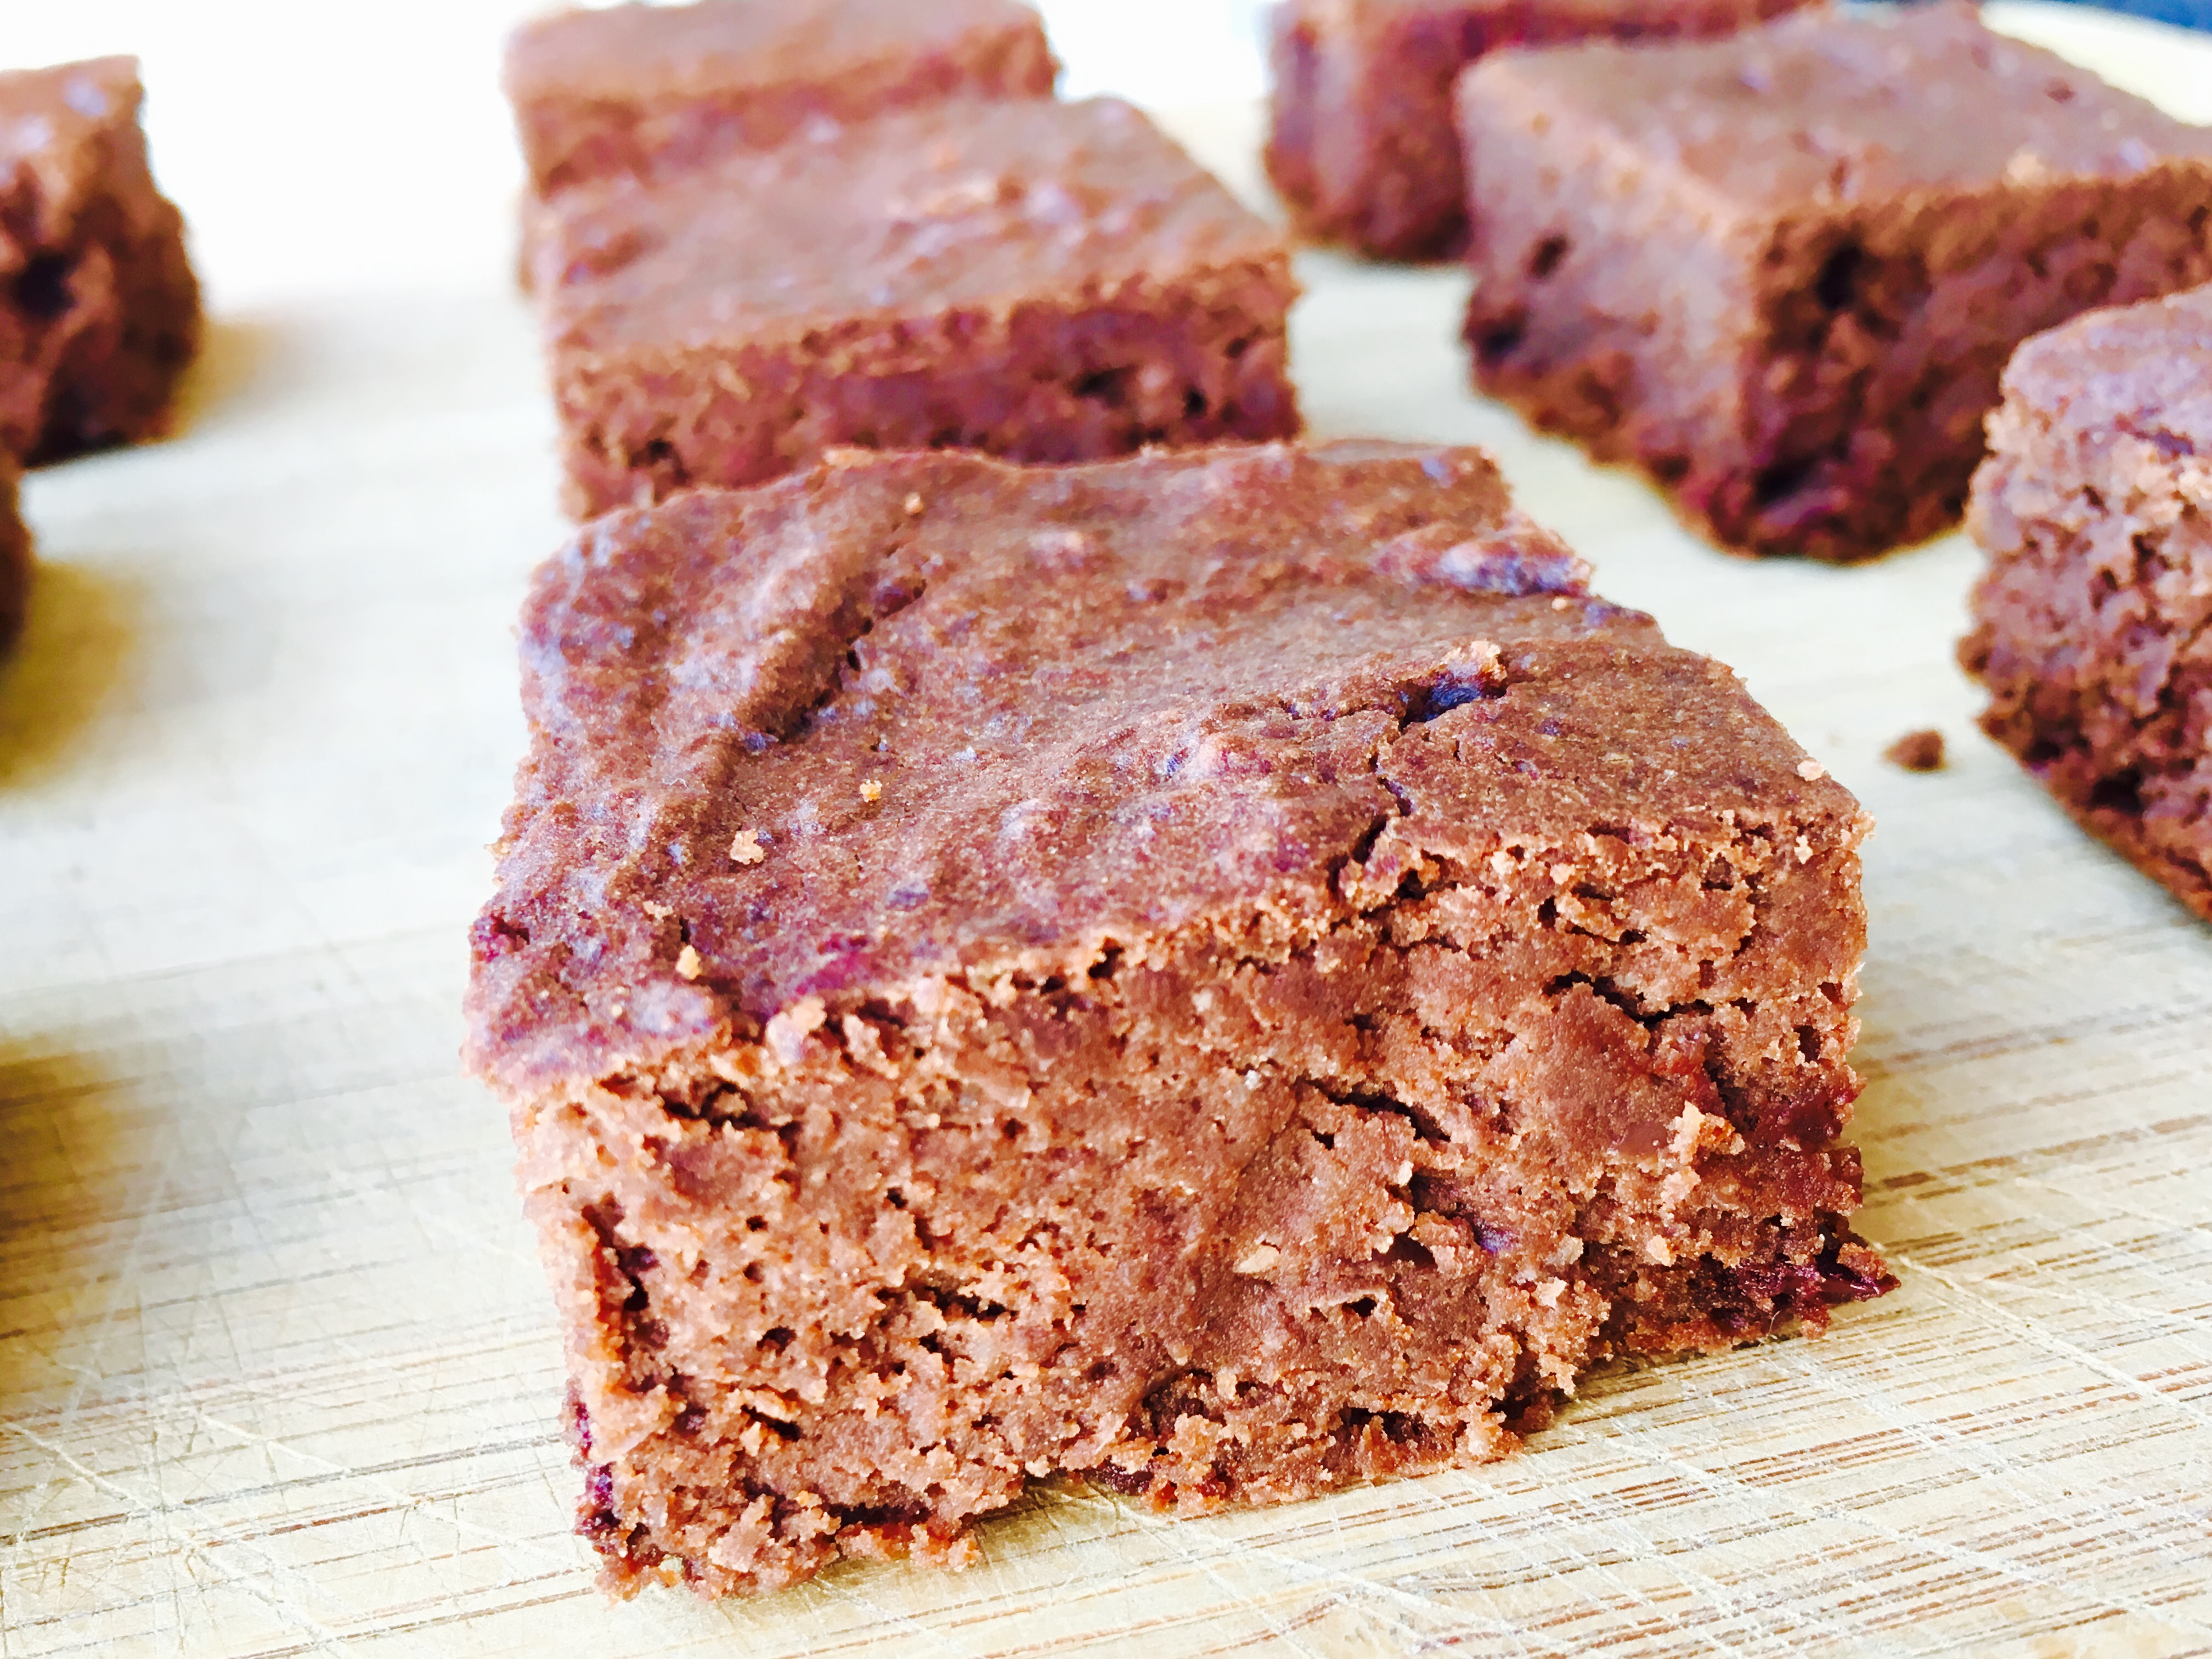 These Flourless Pinto Bean Brownies are gluten-free, sugar-free, and dairy-free. And they're so good they'll fool your whole family!